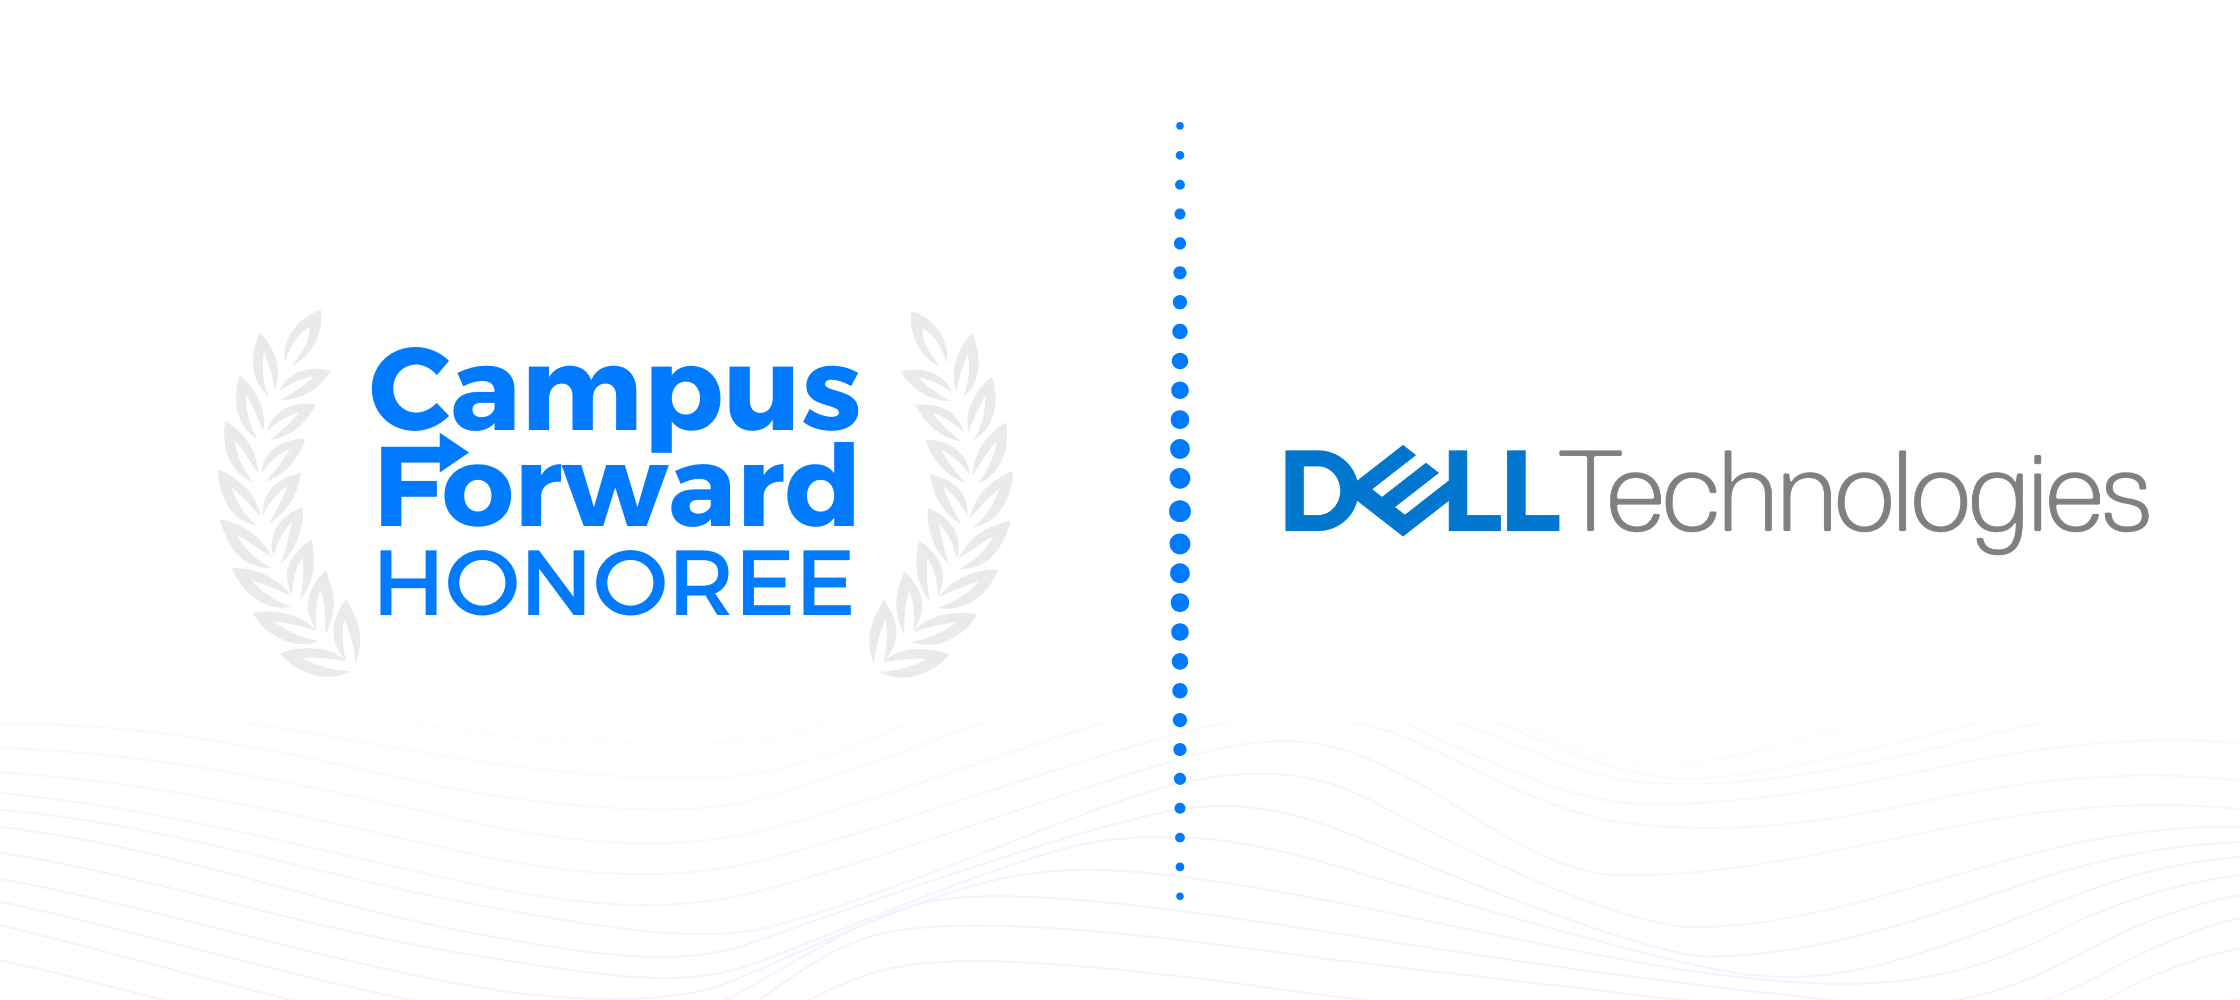 Campus Forward Honoree - Dell Technologies